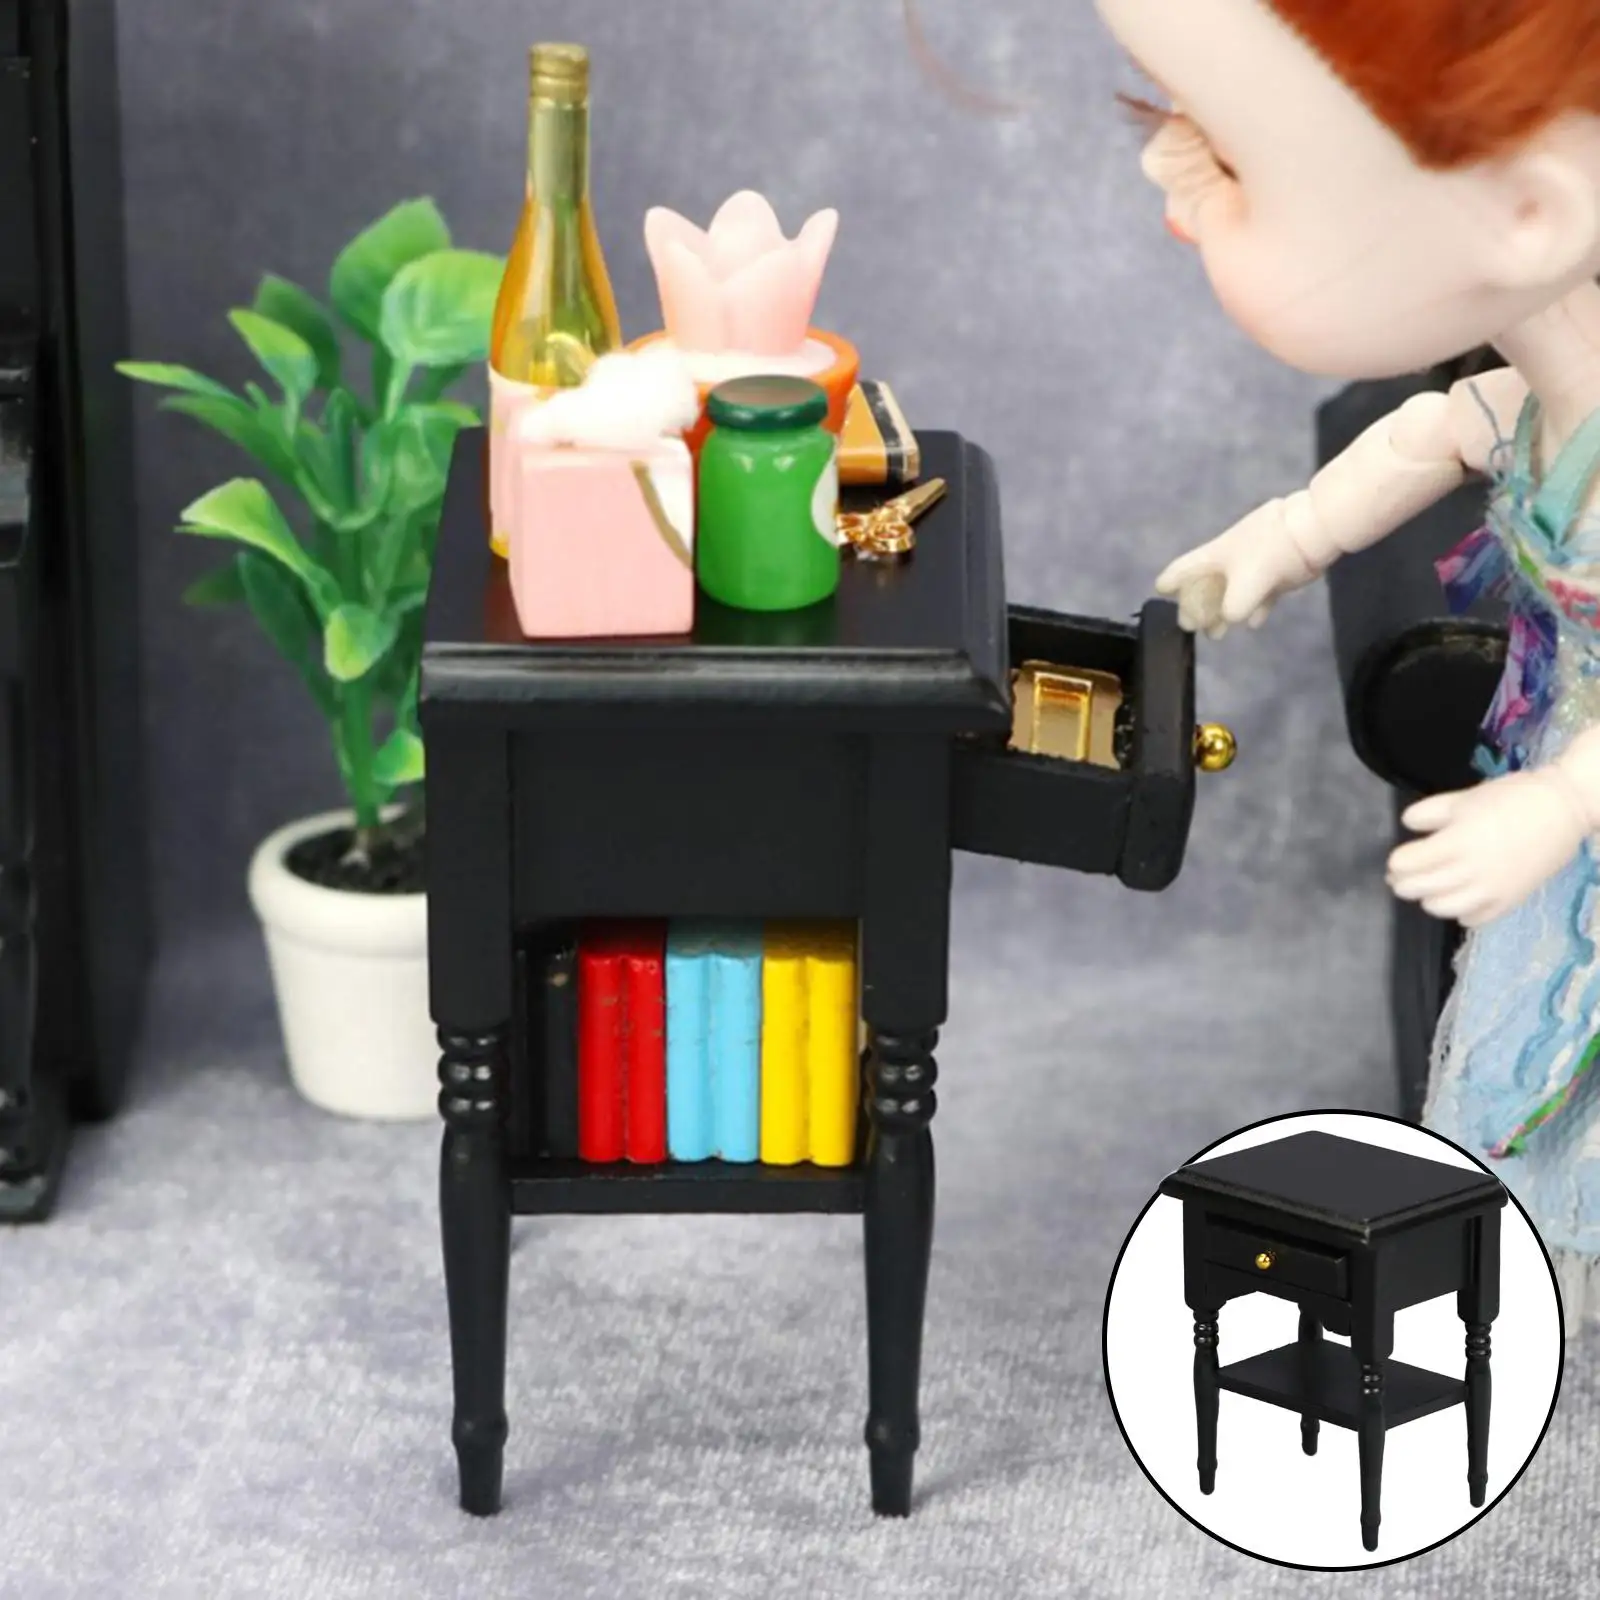 Birch Miniature Bedside Table for 12th Dollhouse Furniture Set Accessory DIY